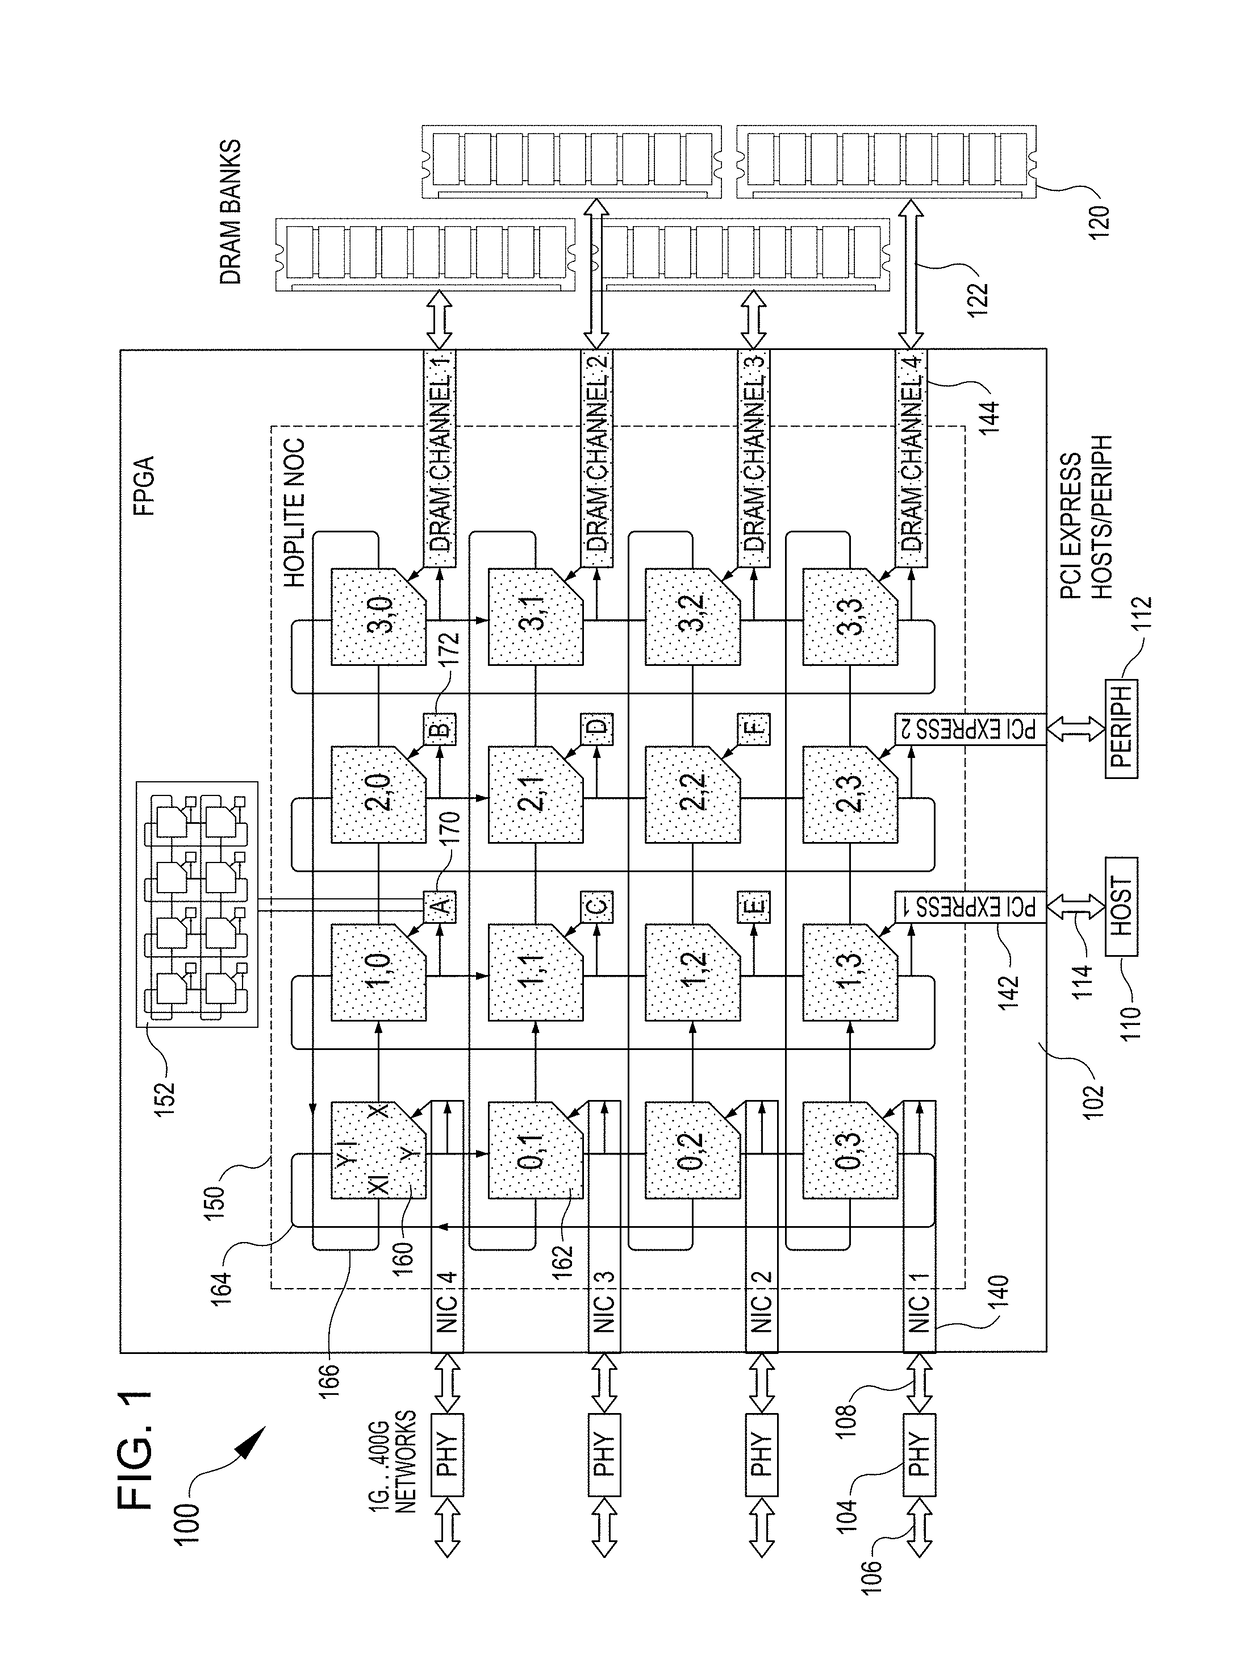 Directional two-dimensional router and interconnection network for field programmable gate arrays, and other circuits and applications of the router and network